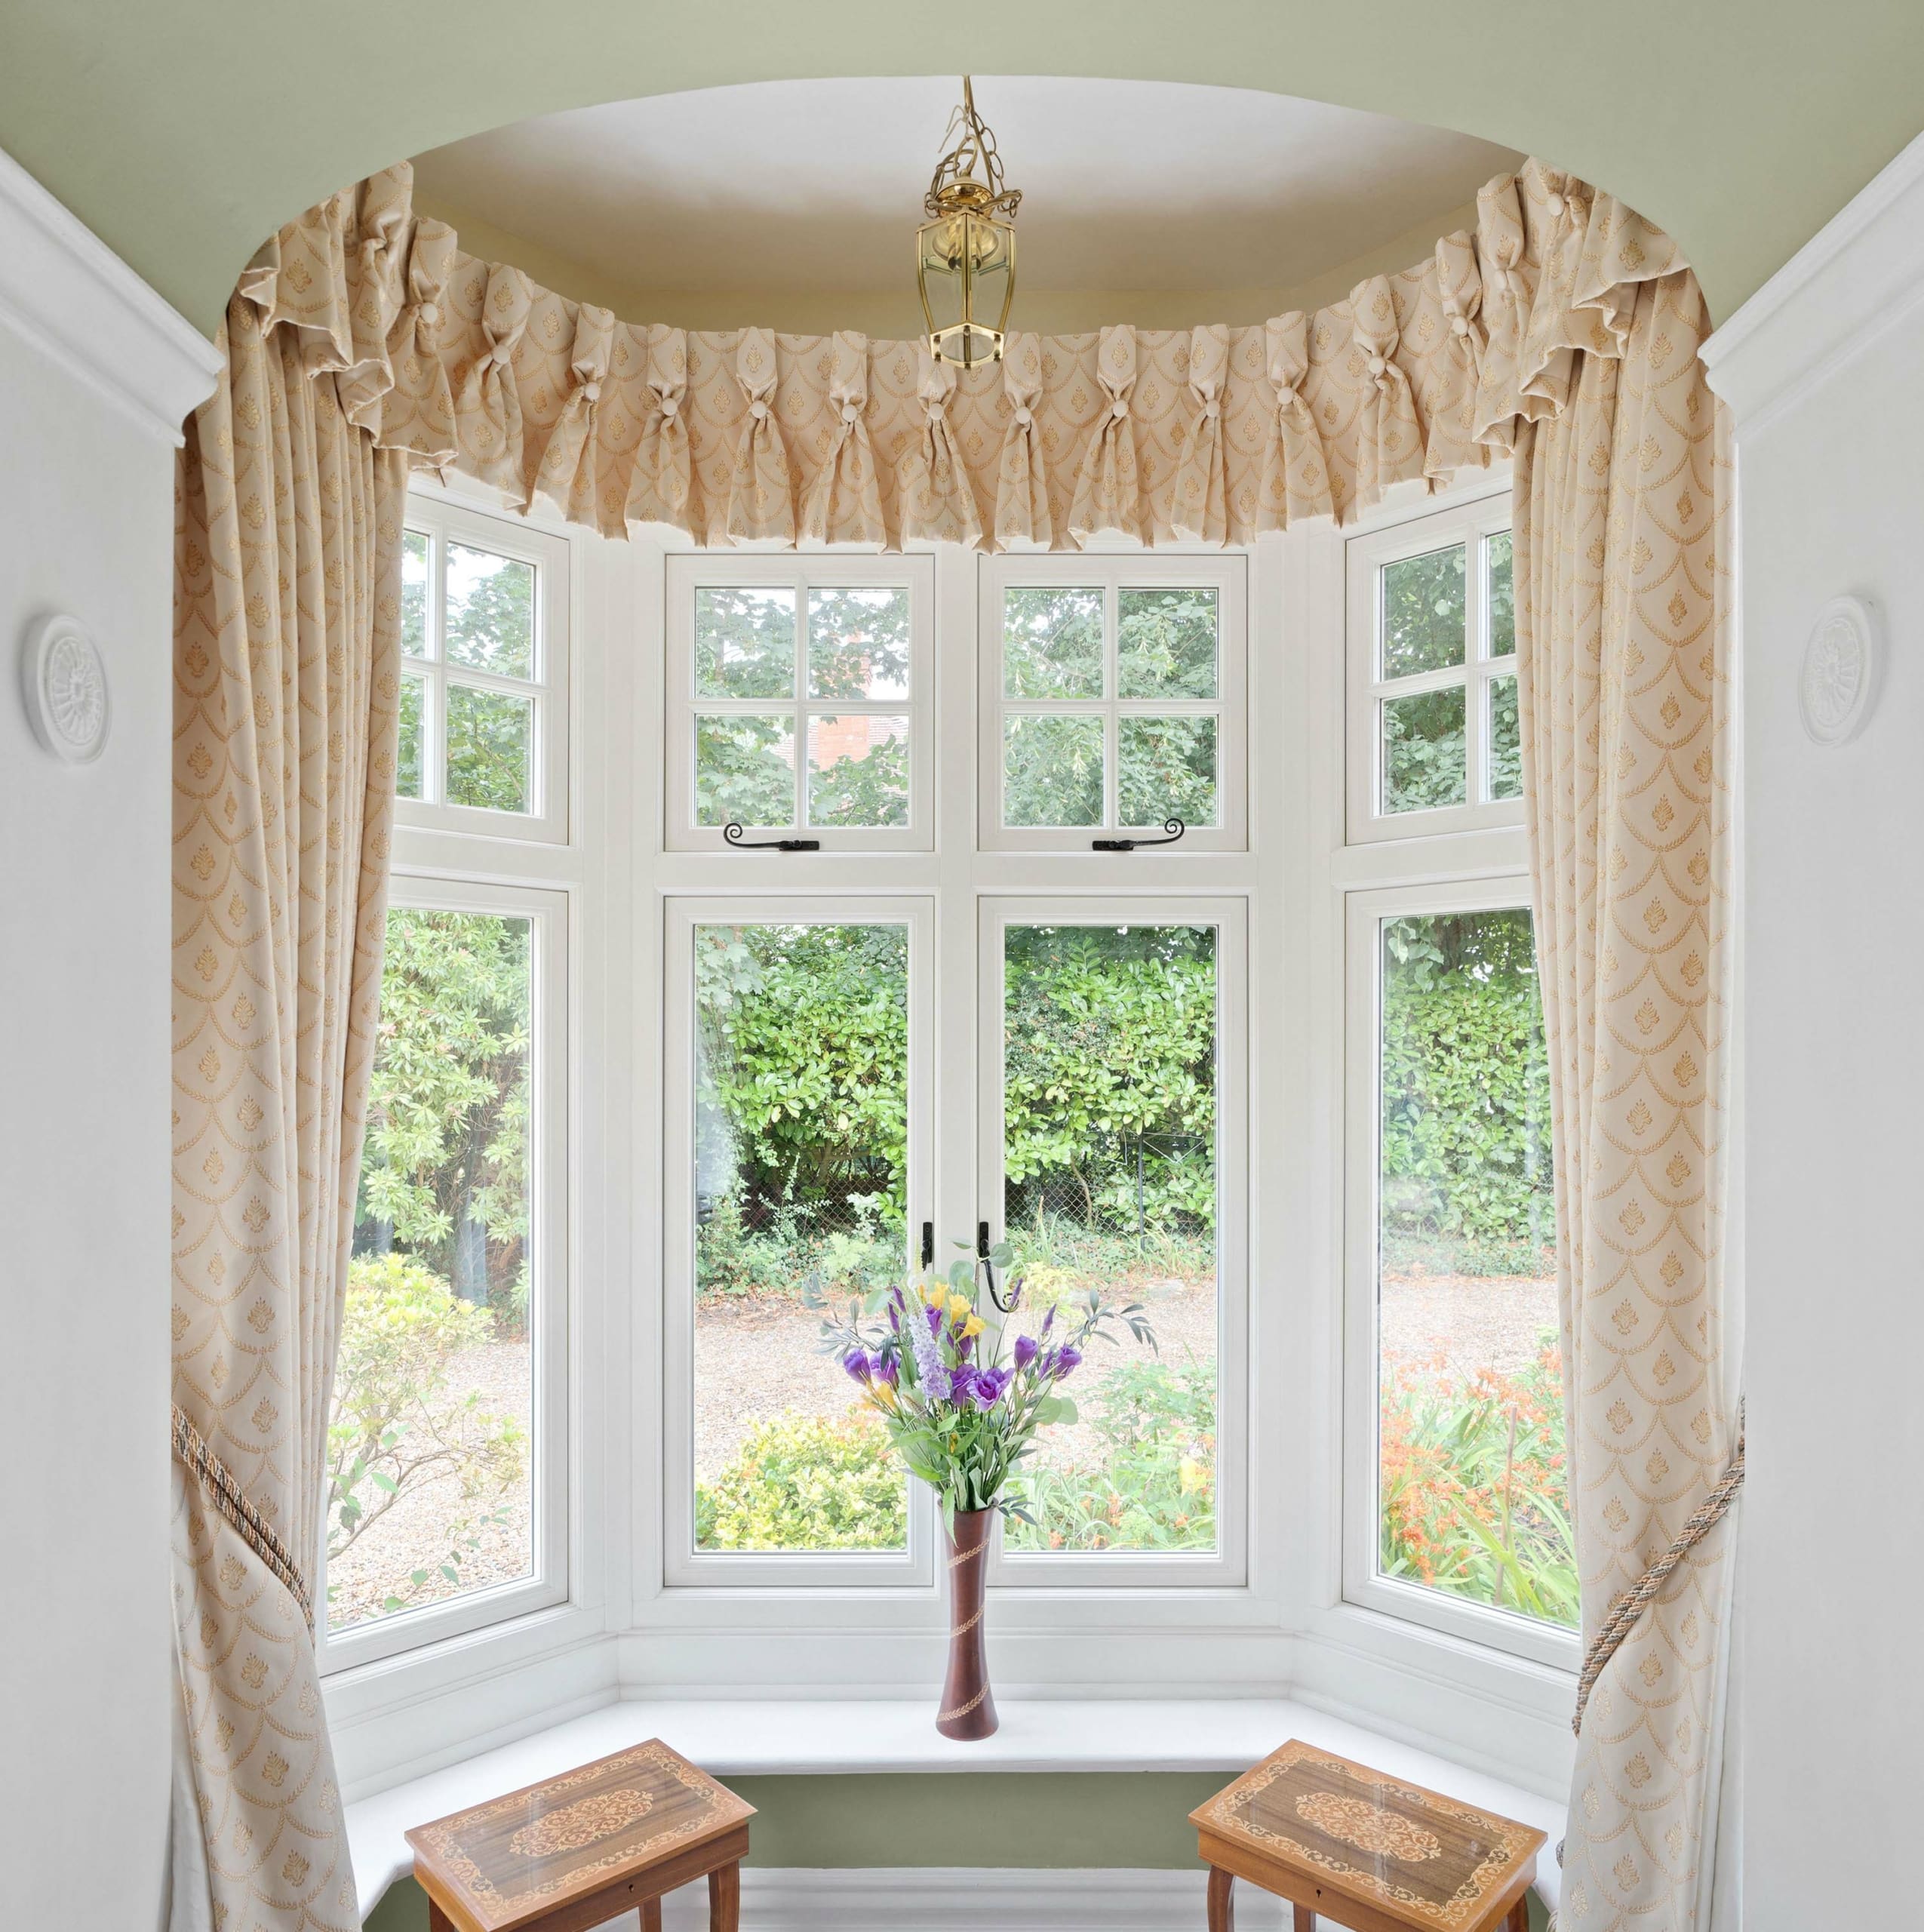 Bay window with traditional printed curtains, flowers and matching side tables.